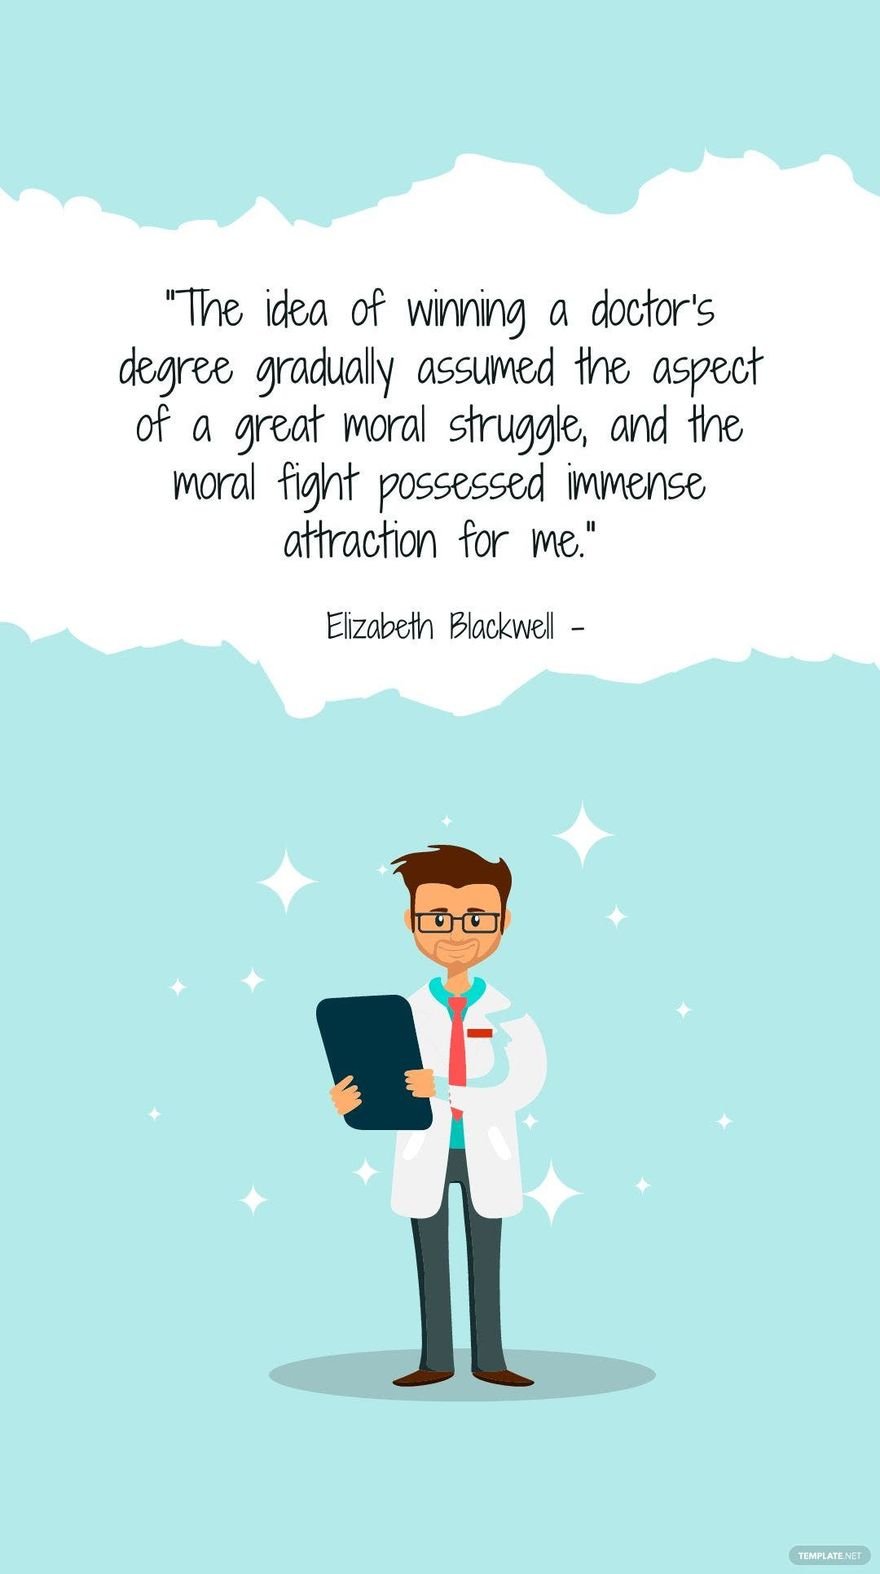 Free Elizabeth Blackwell - The idea of winning a doctor's degree gradually assumed the aspect of a great moral struggle, and the moral fight possessed immense attraction for me.